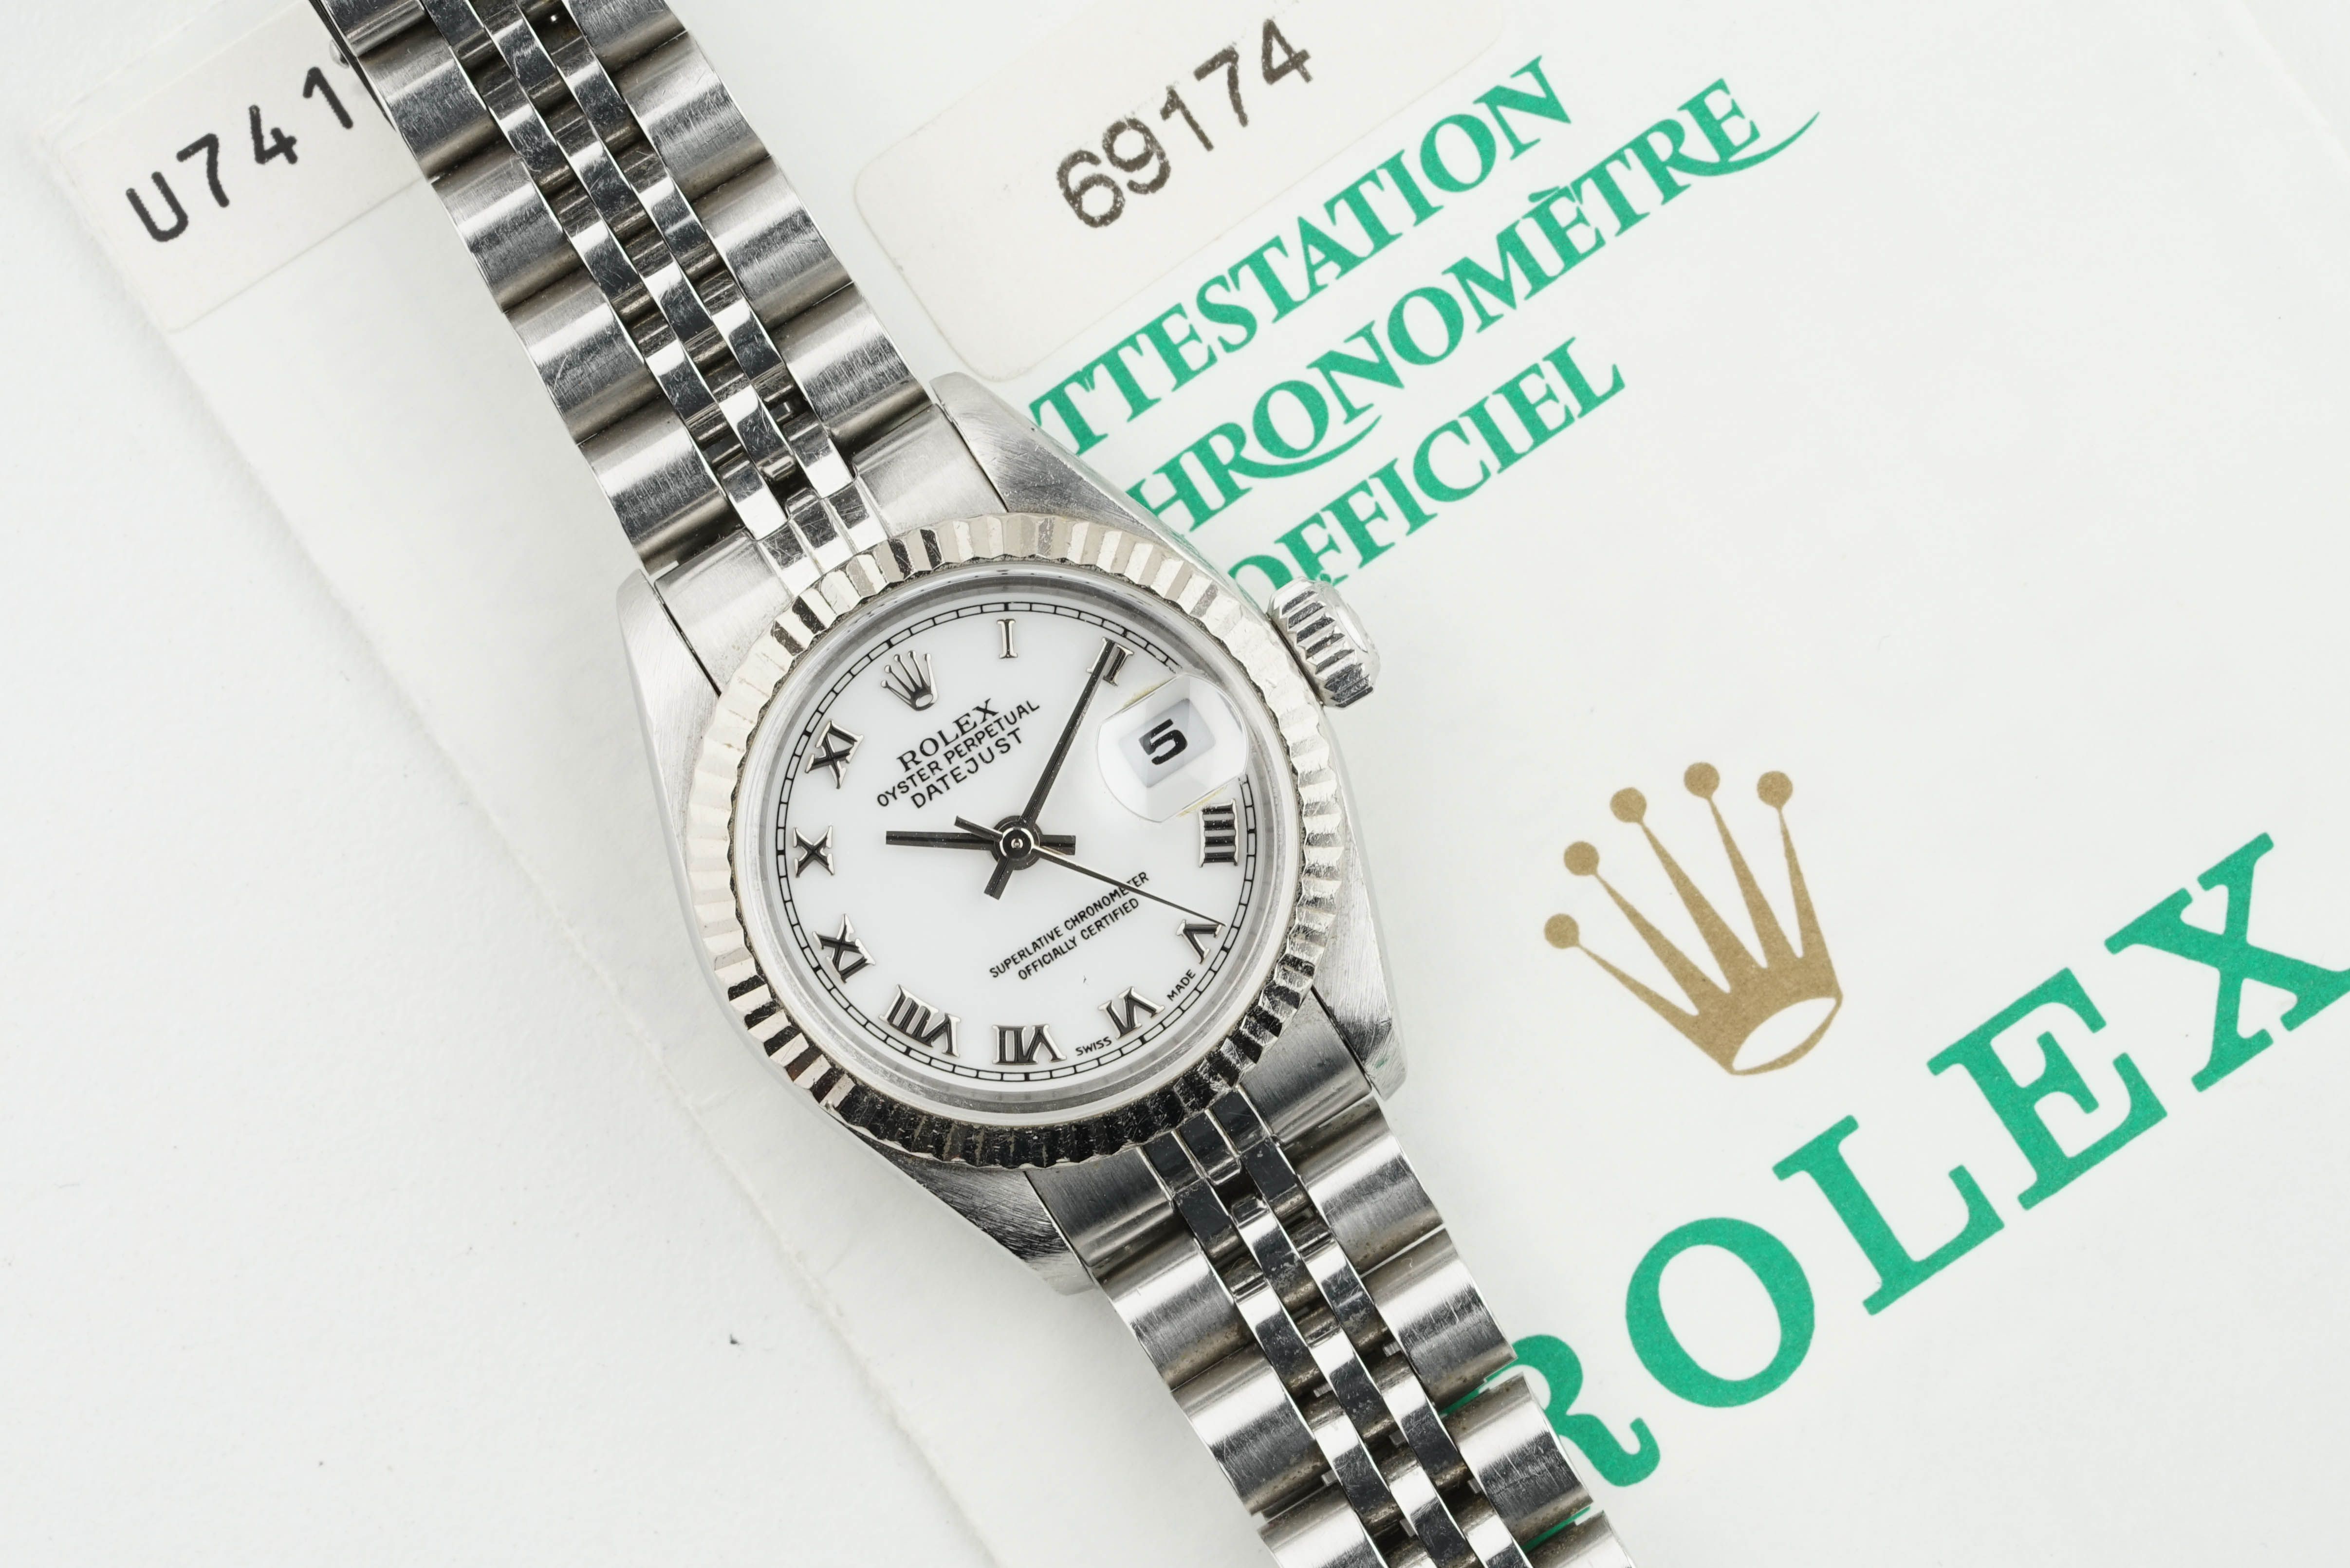 ROLEX OYSTER PERPETUAL DATEJUST W/ GUARANTEE PAPERS REF. 69174 CIRCA 1998, circular white dial